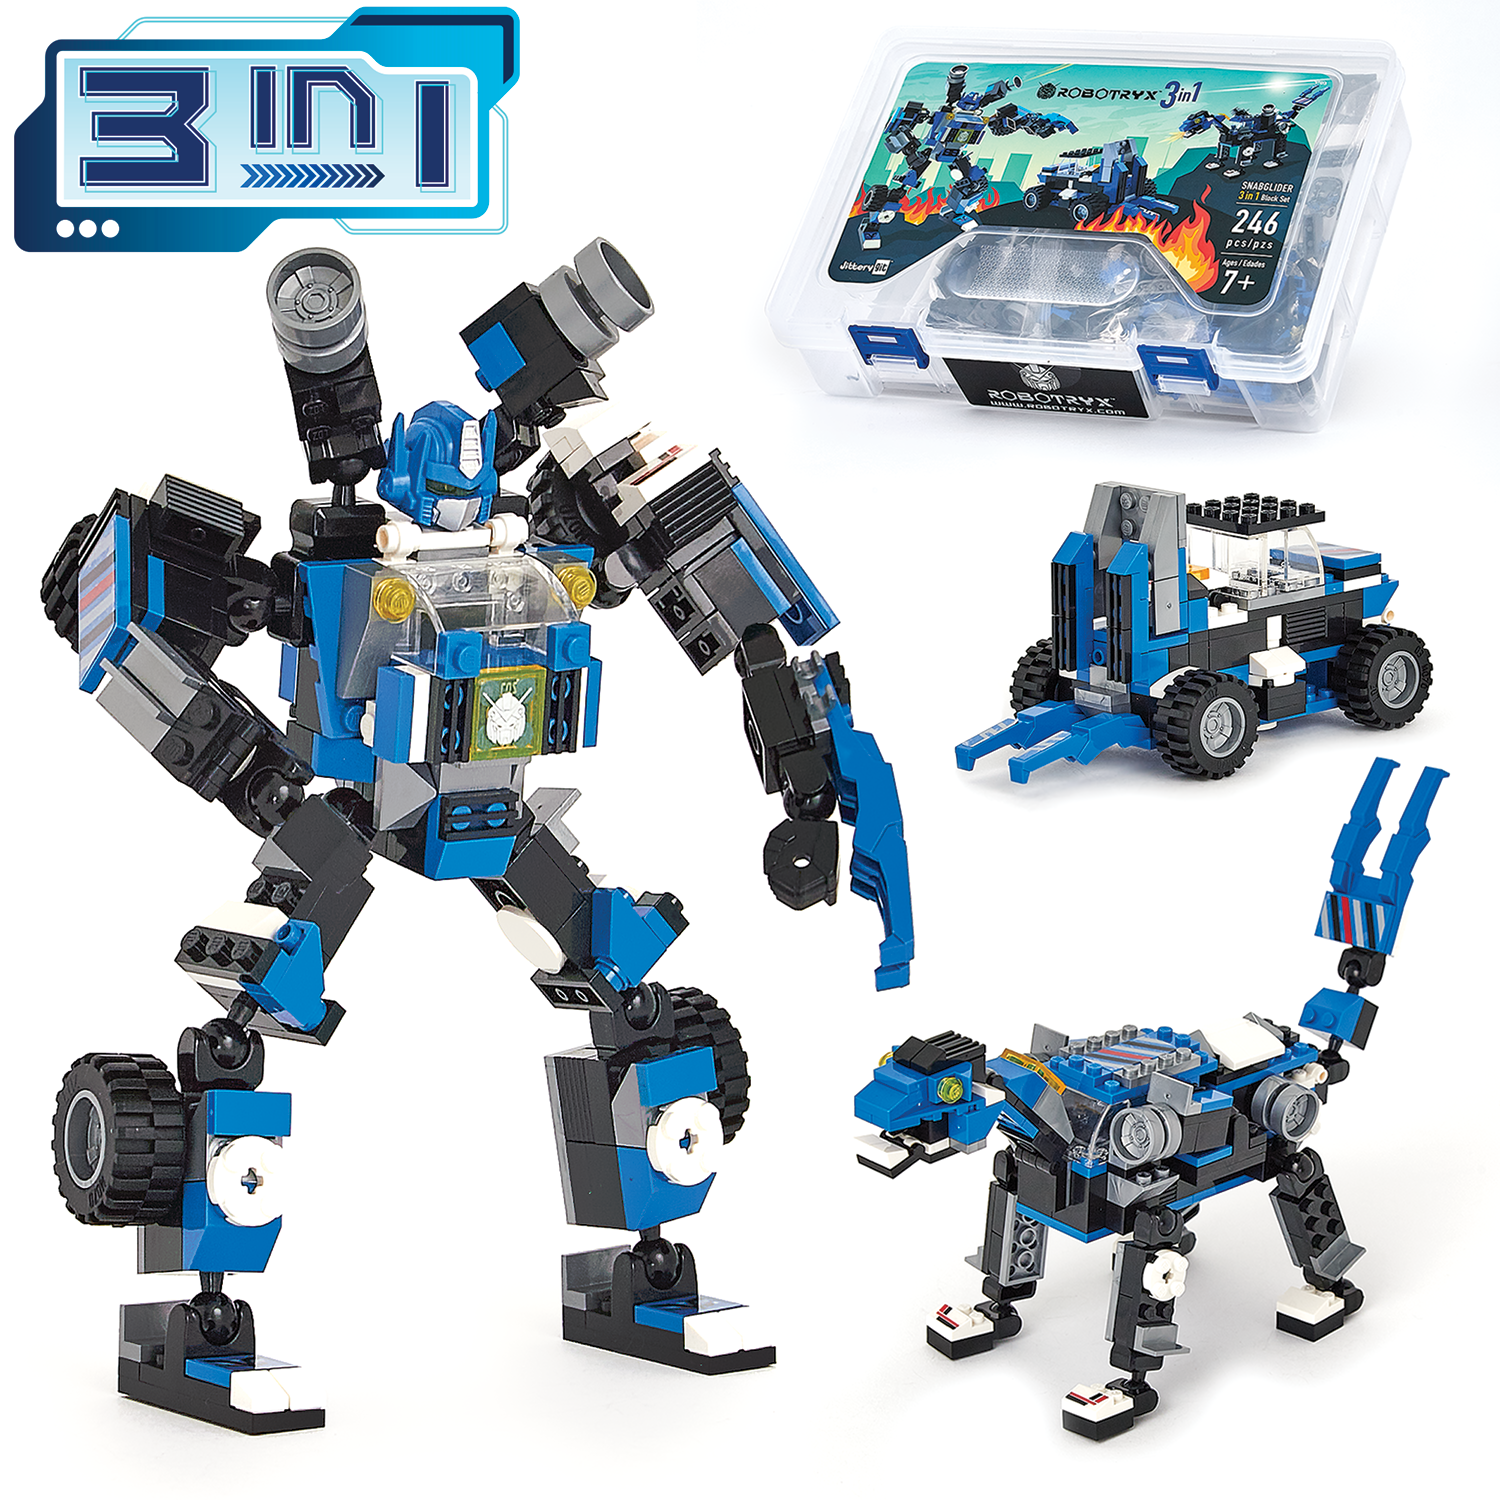 https://ozrobotics.com/wp-content/uploads/2023/01/jitterygit-Robotryx-Blue-SnabGlider-With-3in11500X1500.png